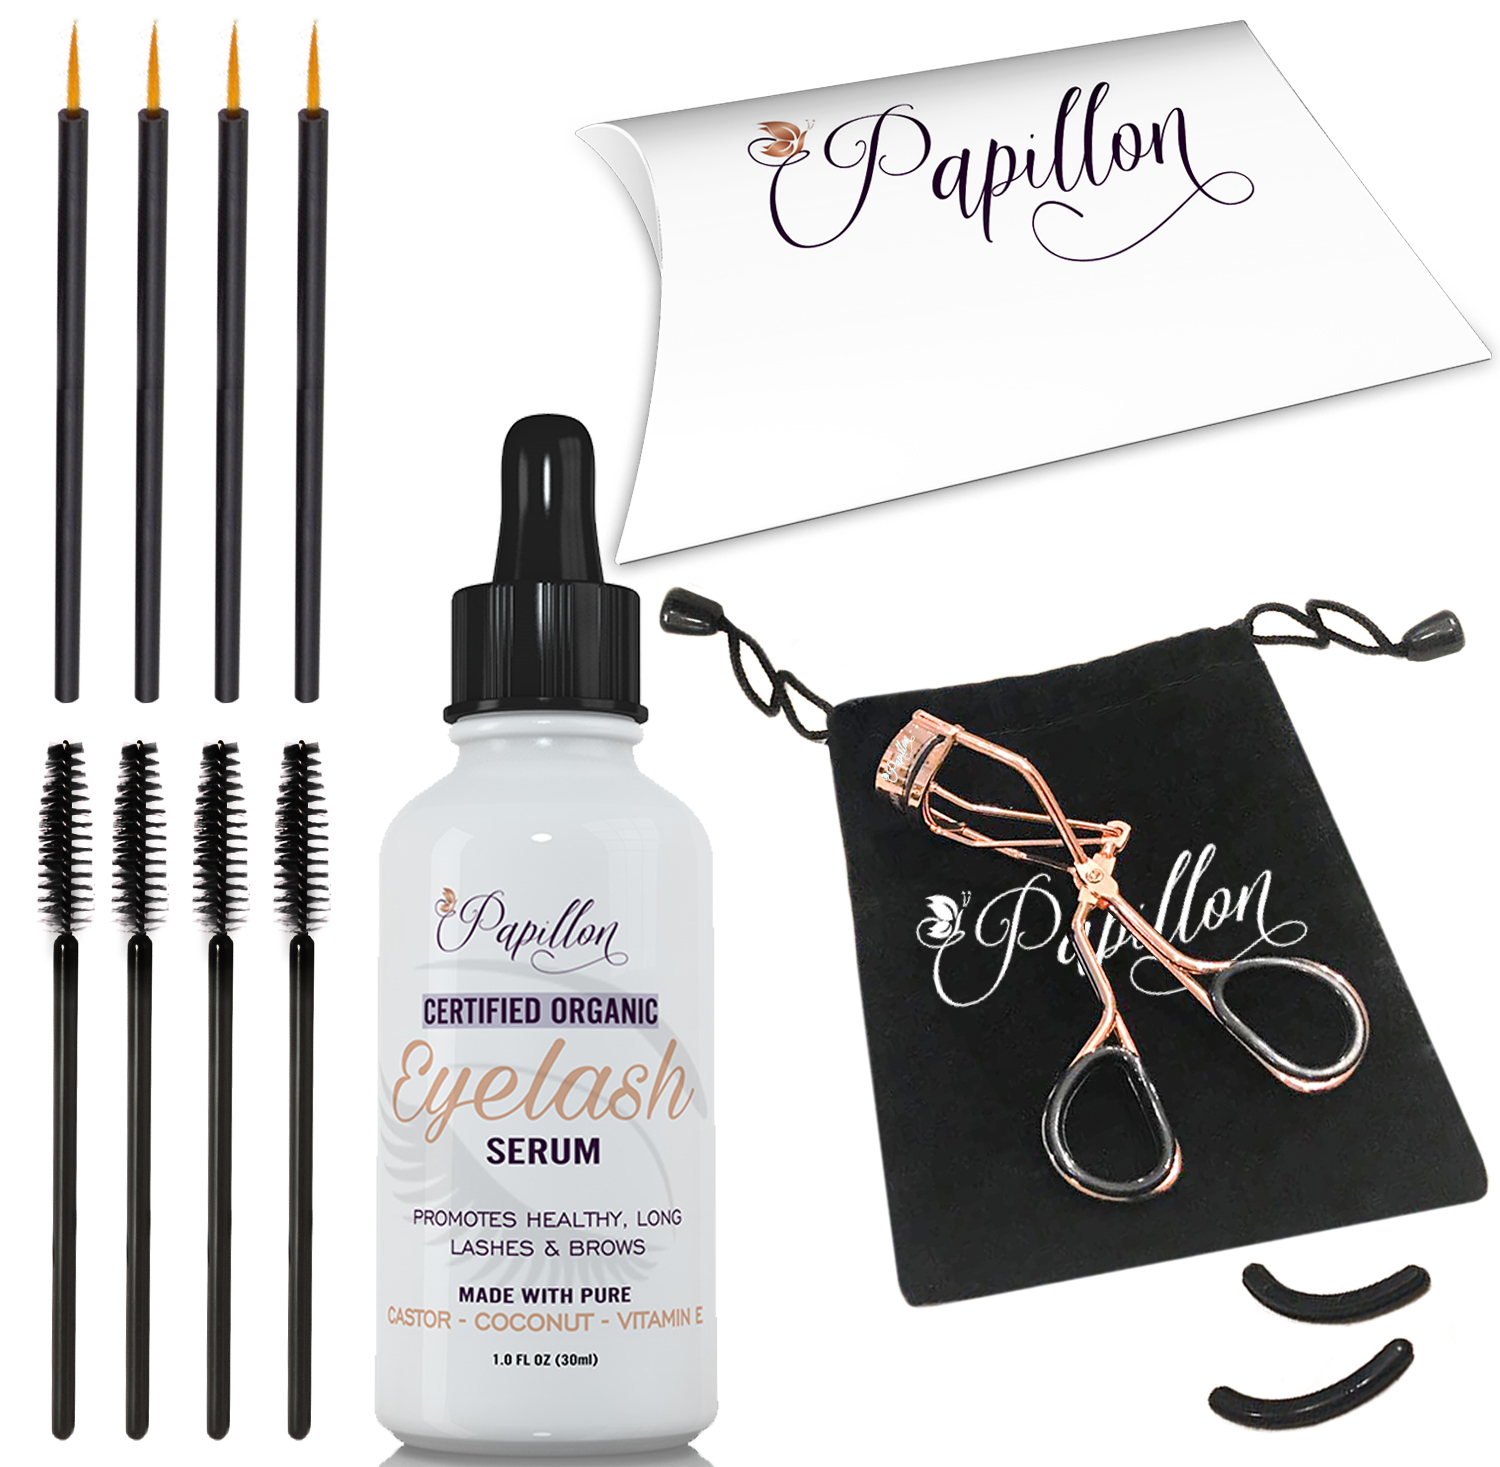 The Papillon Organic Eyelash Growth Serum Kit (MSRP $35) makes a great holiday gift and comes with a gift box.